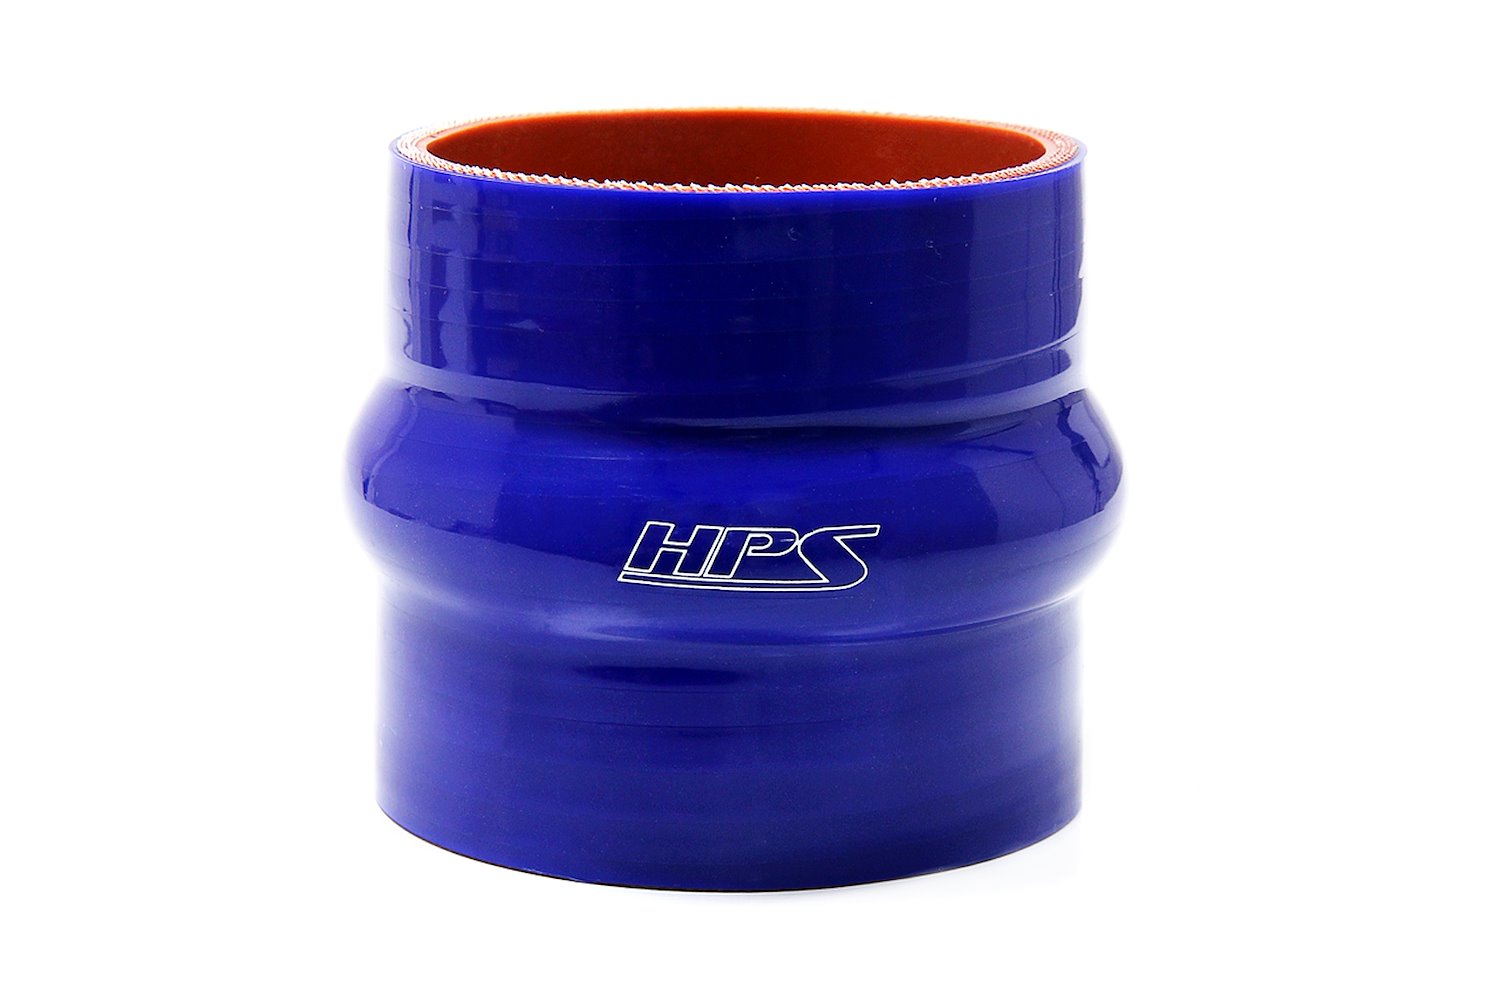 HTSHC-175-L6-BLUE Silicone Hump Coupler Hose, High-Temp 4-Ply Reinforced, 1-3/4 in. ID, 6 in. Long, Blue